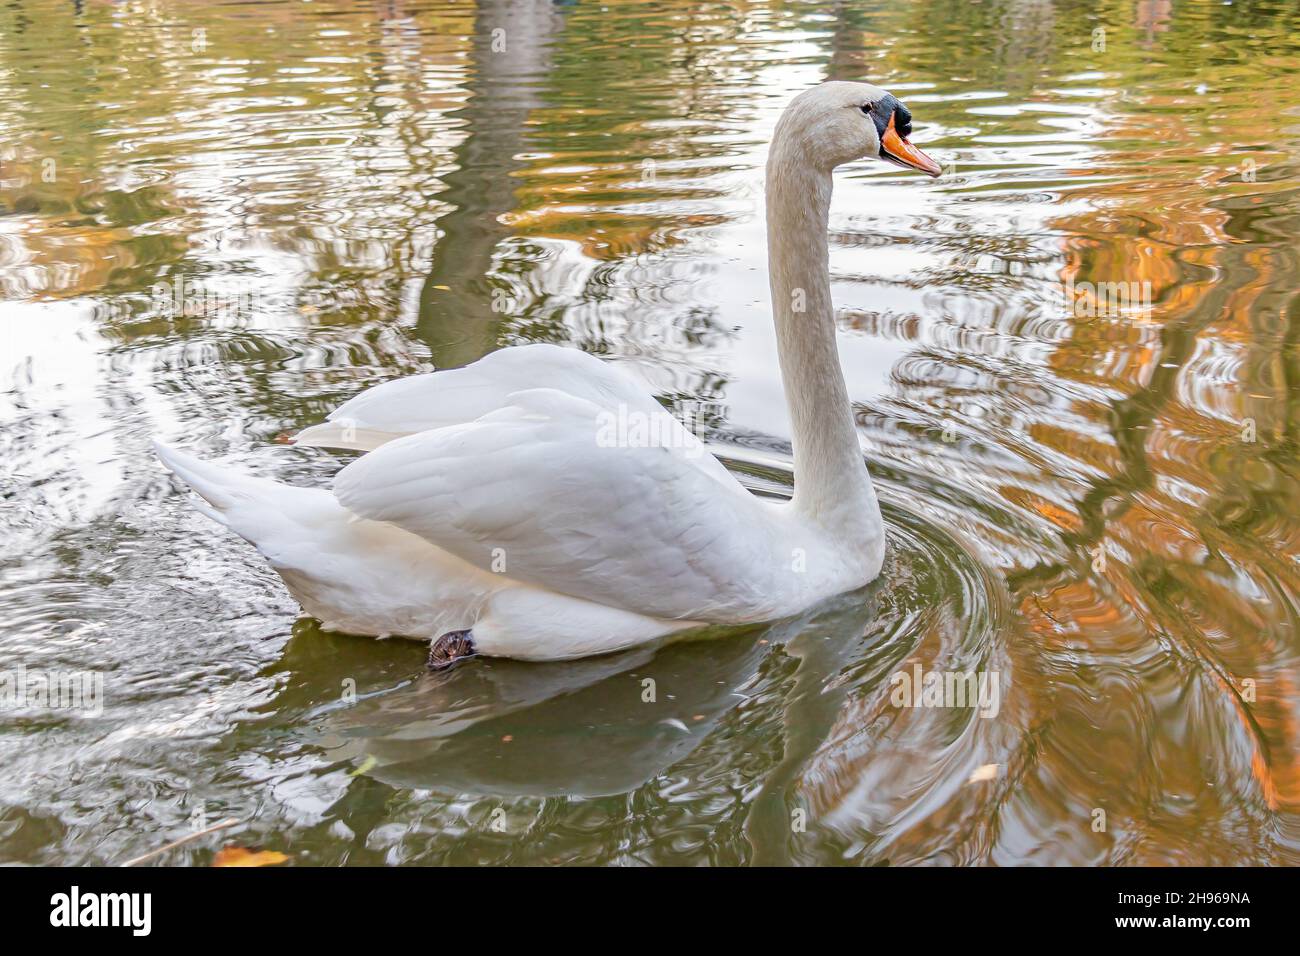 A white male swan swimming in a pond Stock Photo